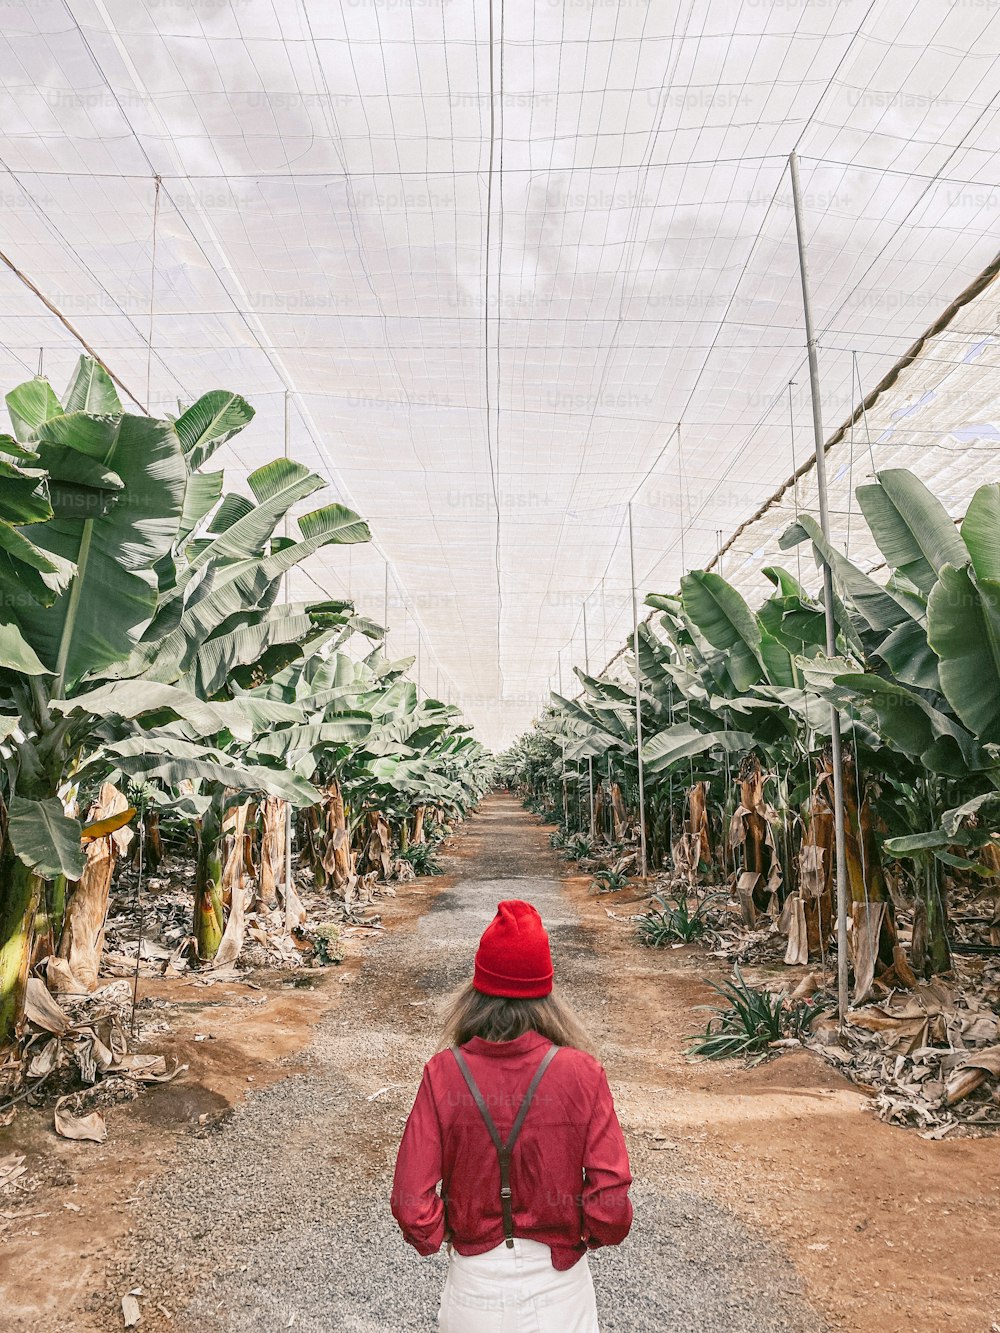 Woman as a tourist or farmer dressed casually in red and white walking between banana rows at the plantation. Image made on mobile phone